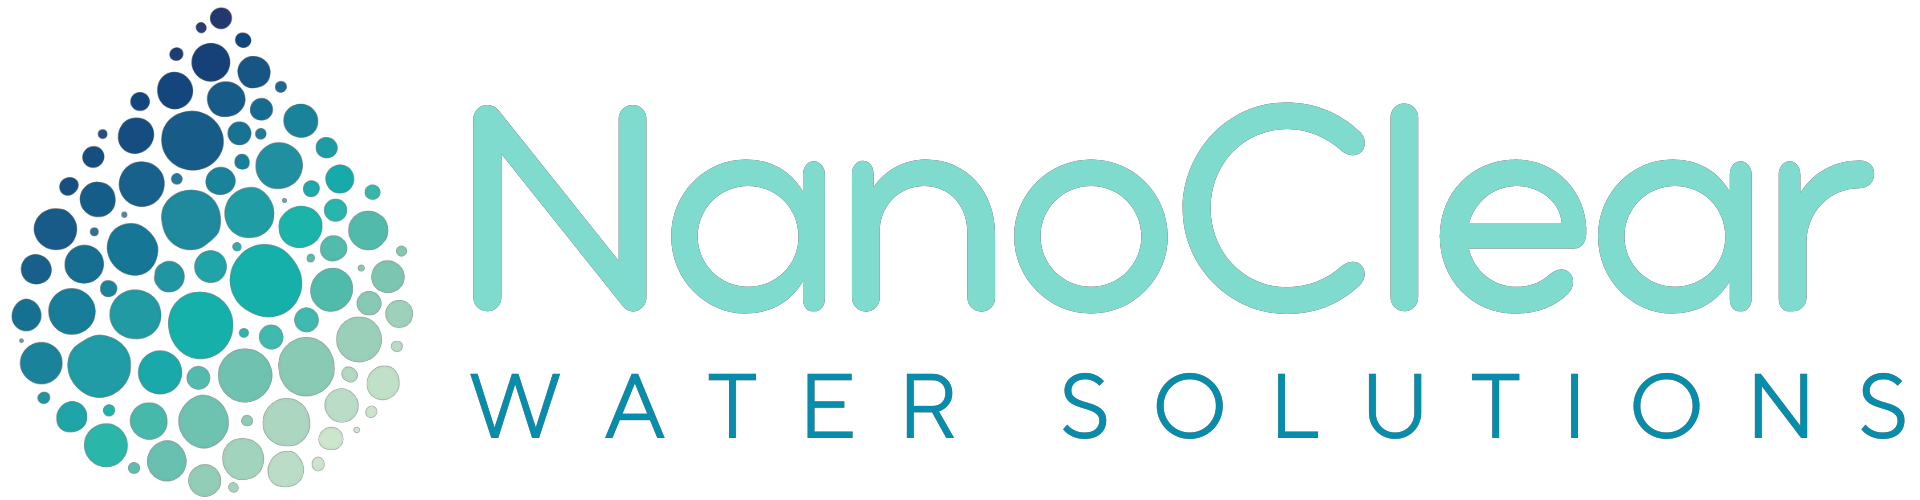 Nanoclear logo header image chlorine free solutions for pools and agriculture